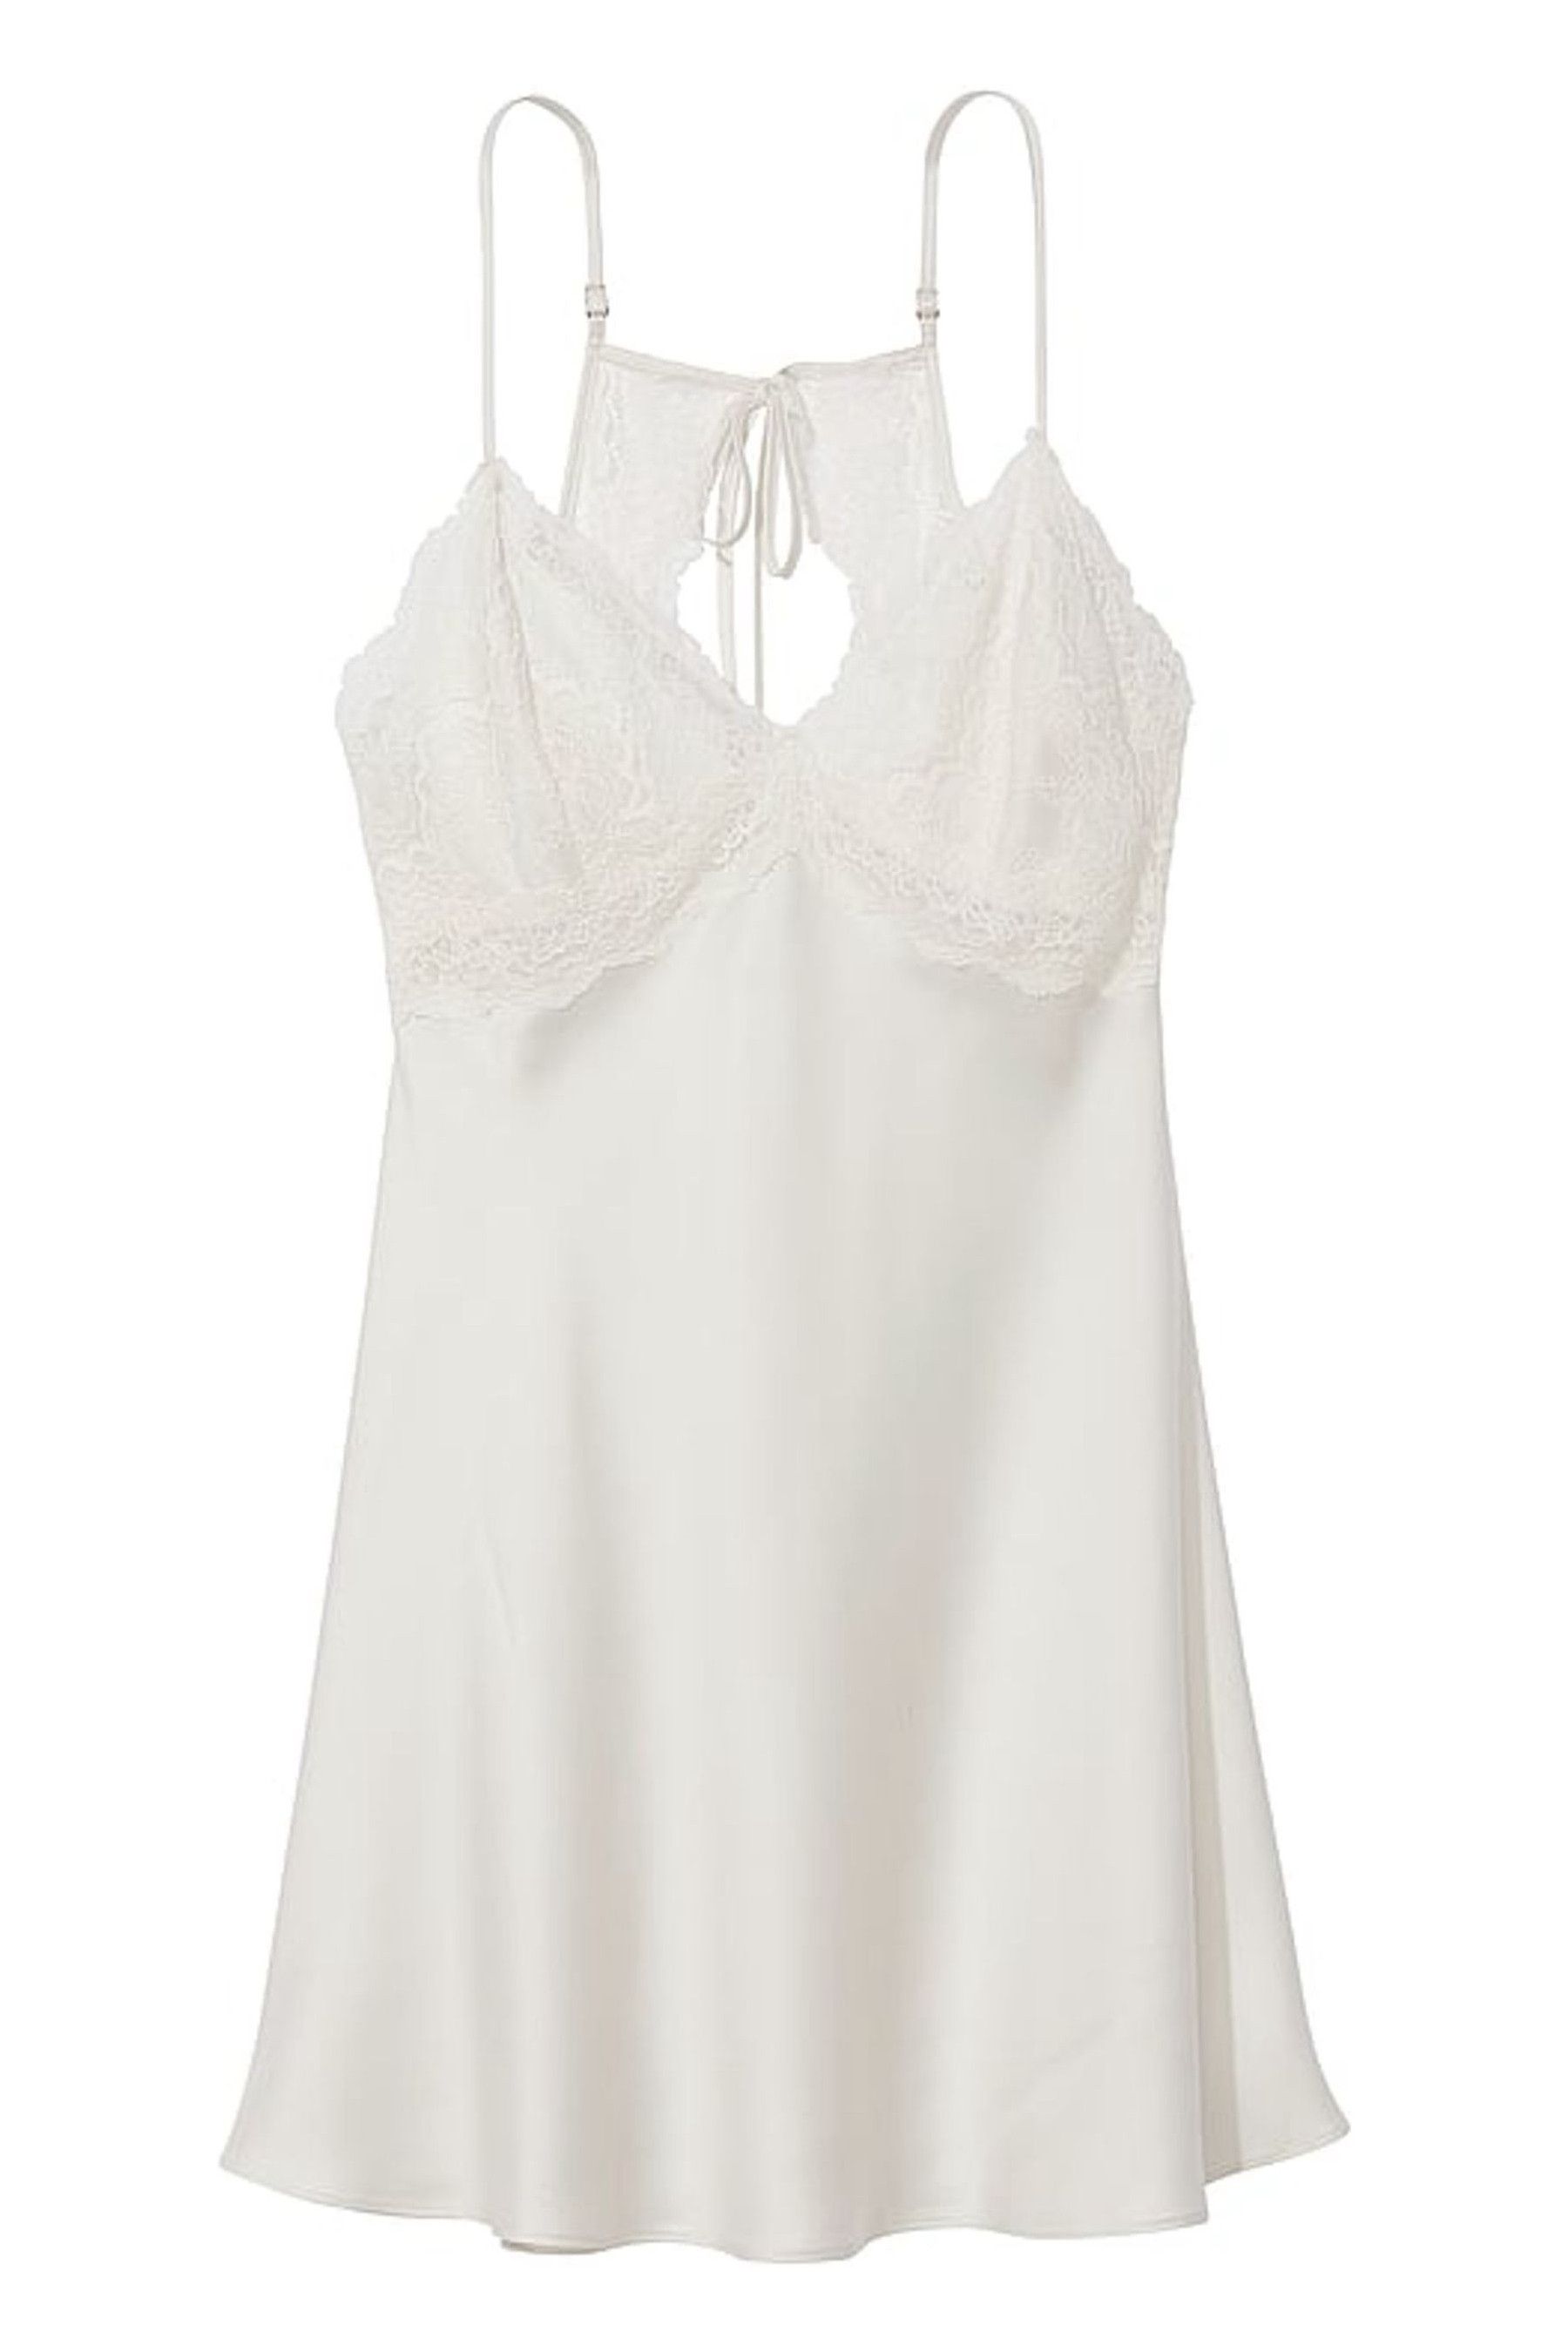 Buy Victoria's Secret Lace Plunge Open Back Slip Dress from the ...